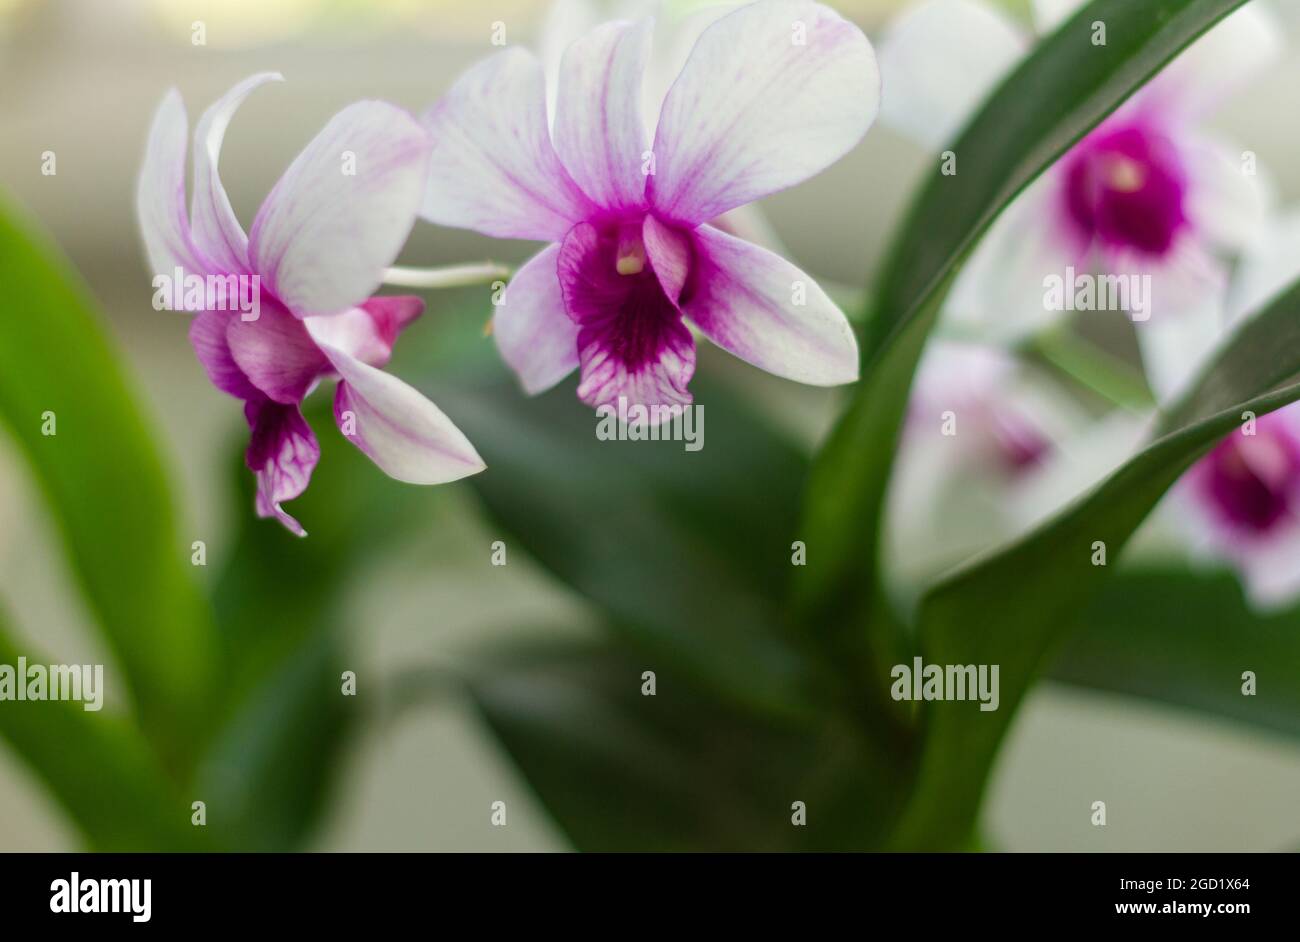 Orchid plants in bloom in white and purple Stock Photo